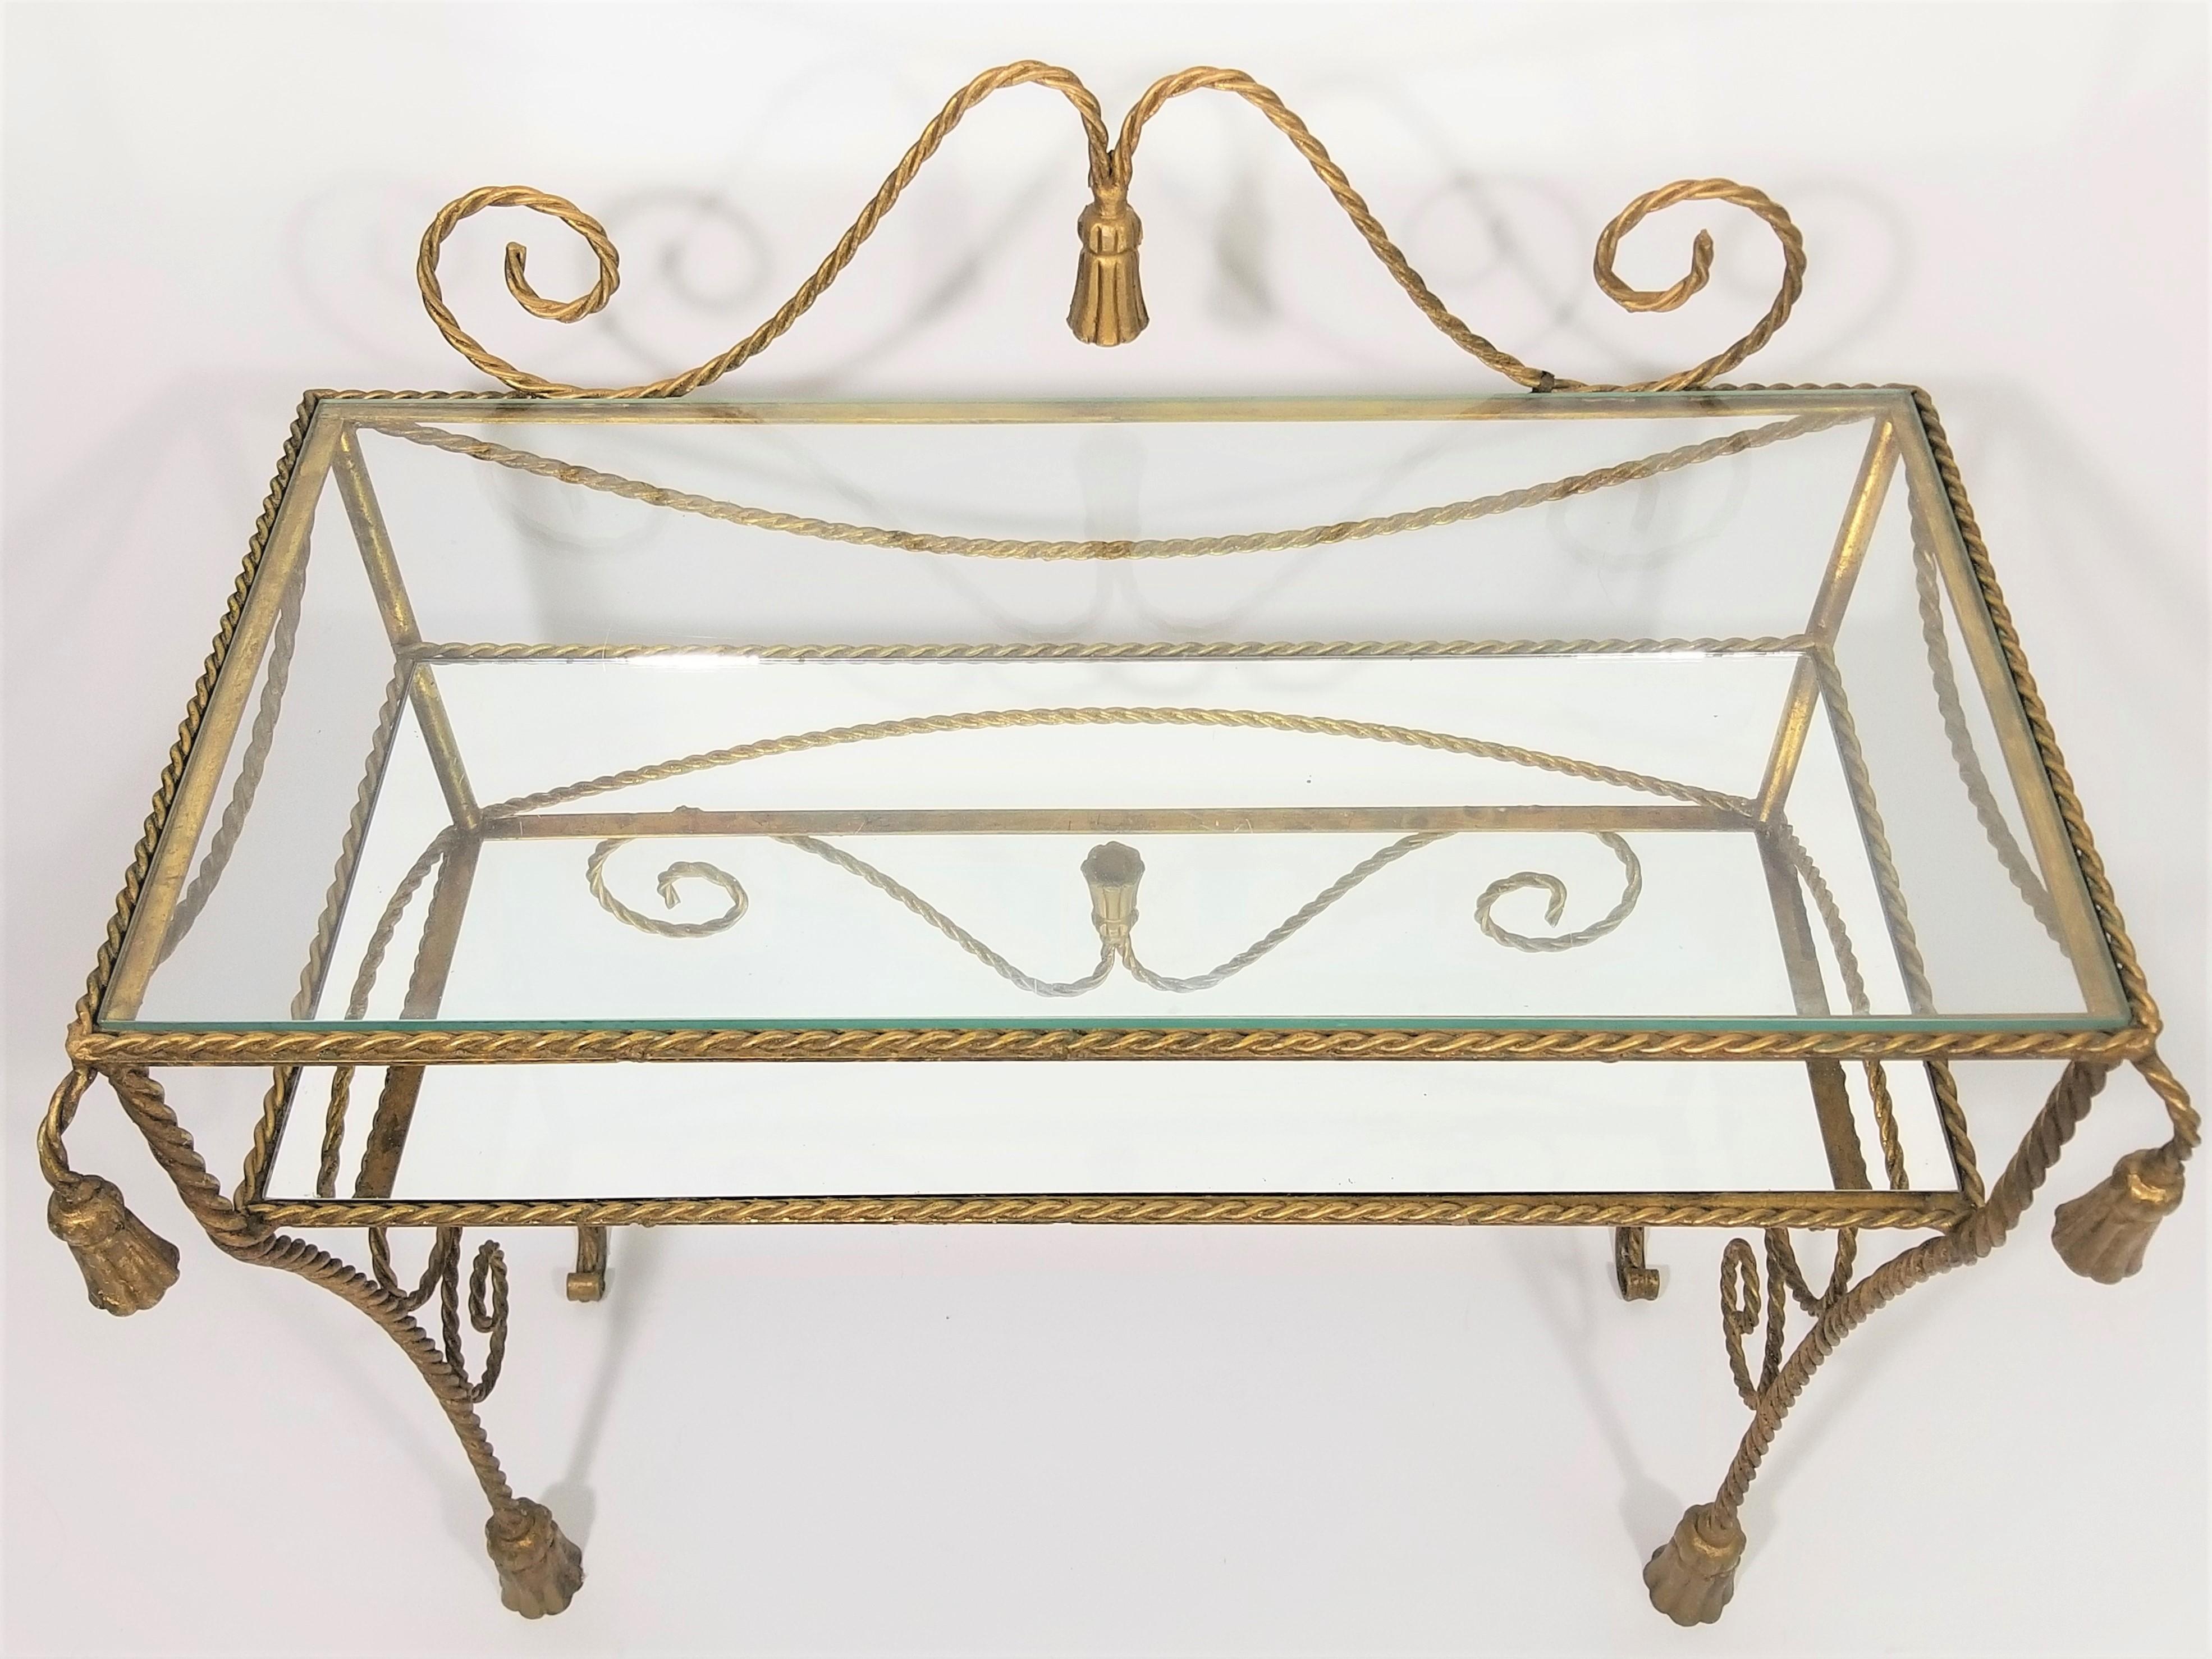 Gilt Italian Gilded Rope Tassel Glass Mirror Vanity Dressing Table Made in Italy For Sale